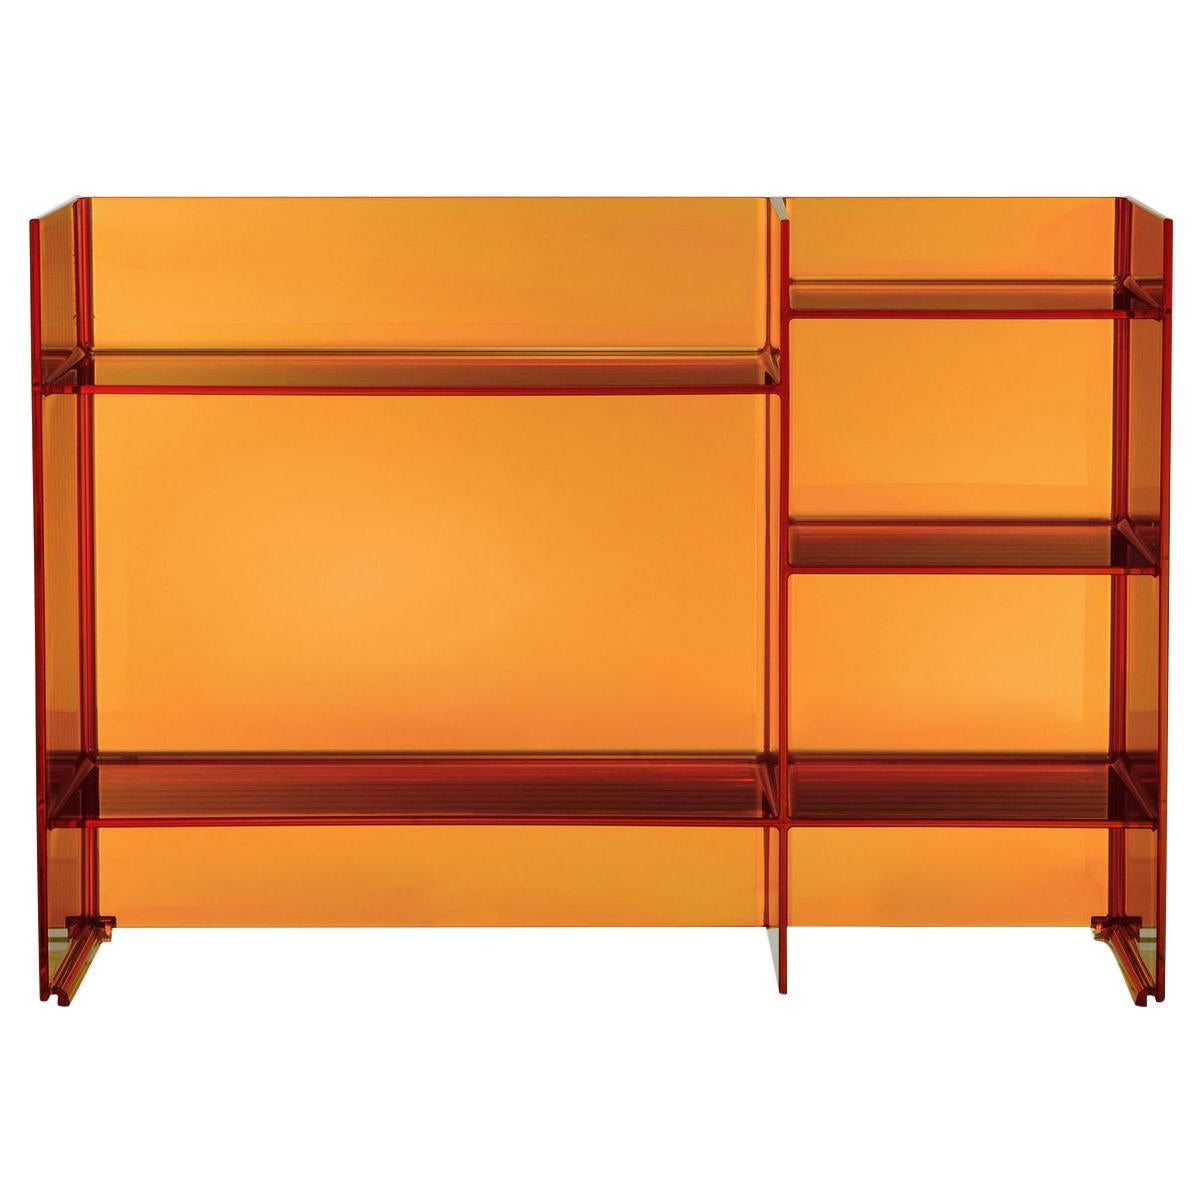 Kartell Sound Rack Modular Bookcase in Amber by Ludovica and Roberto Palomba